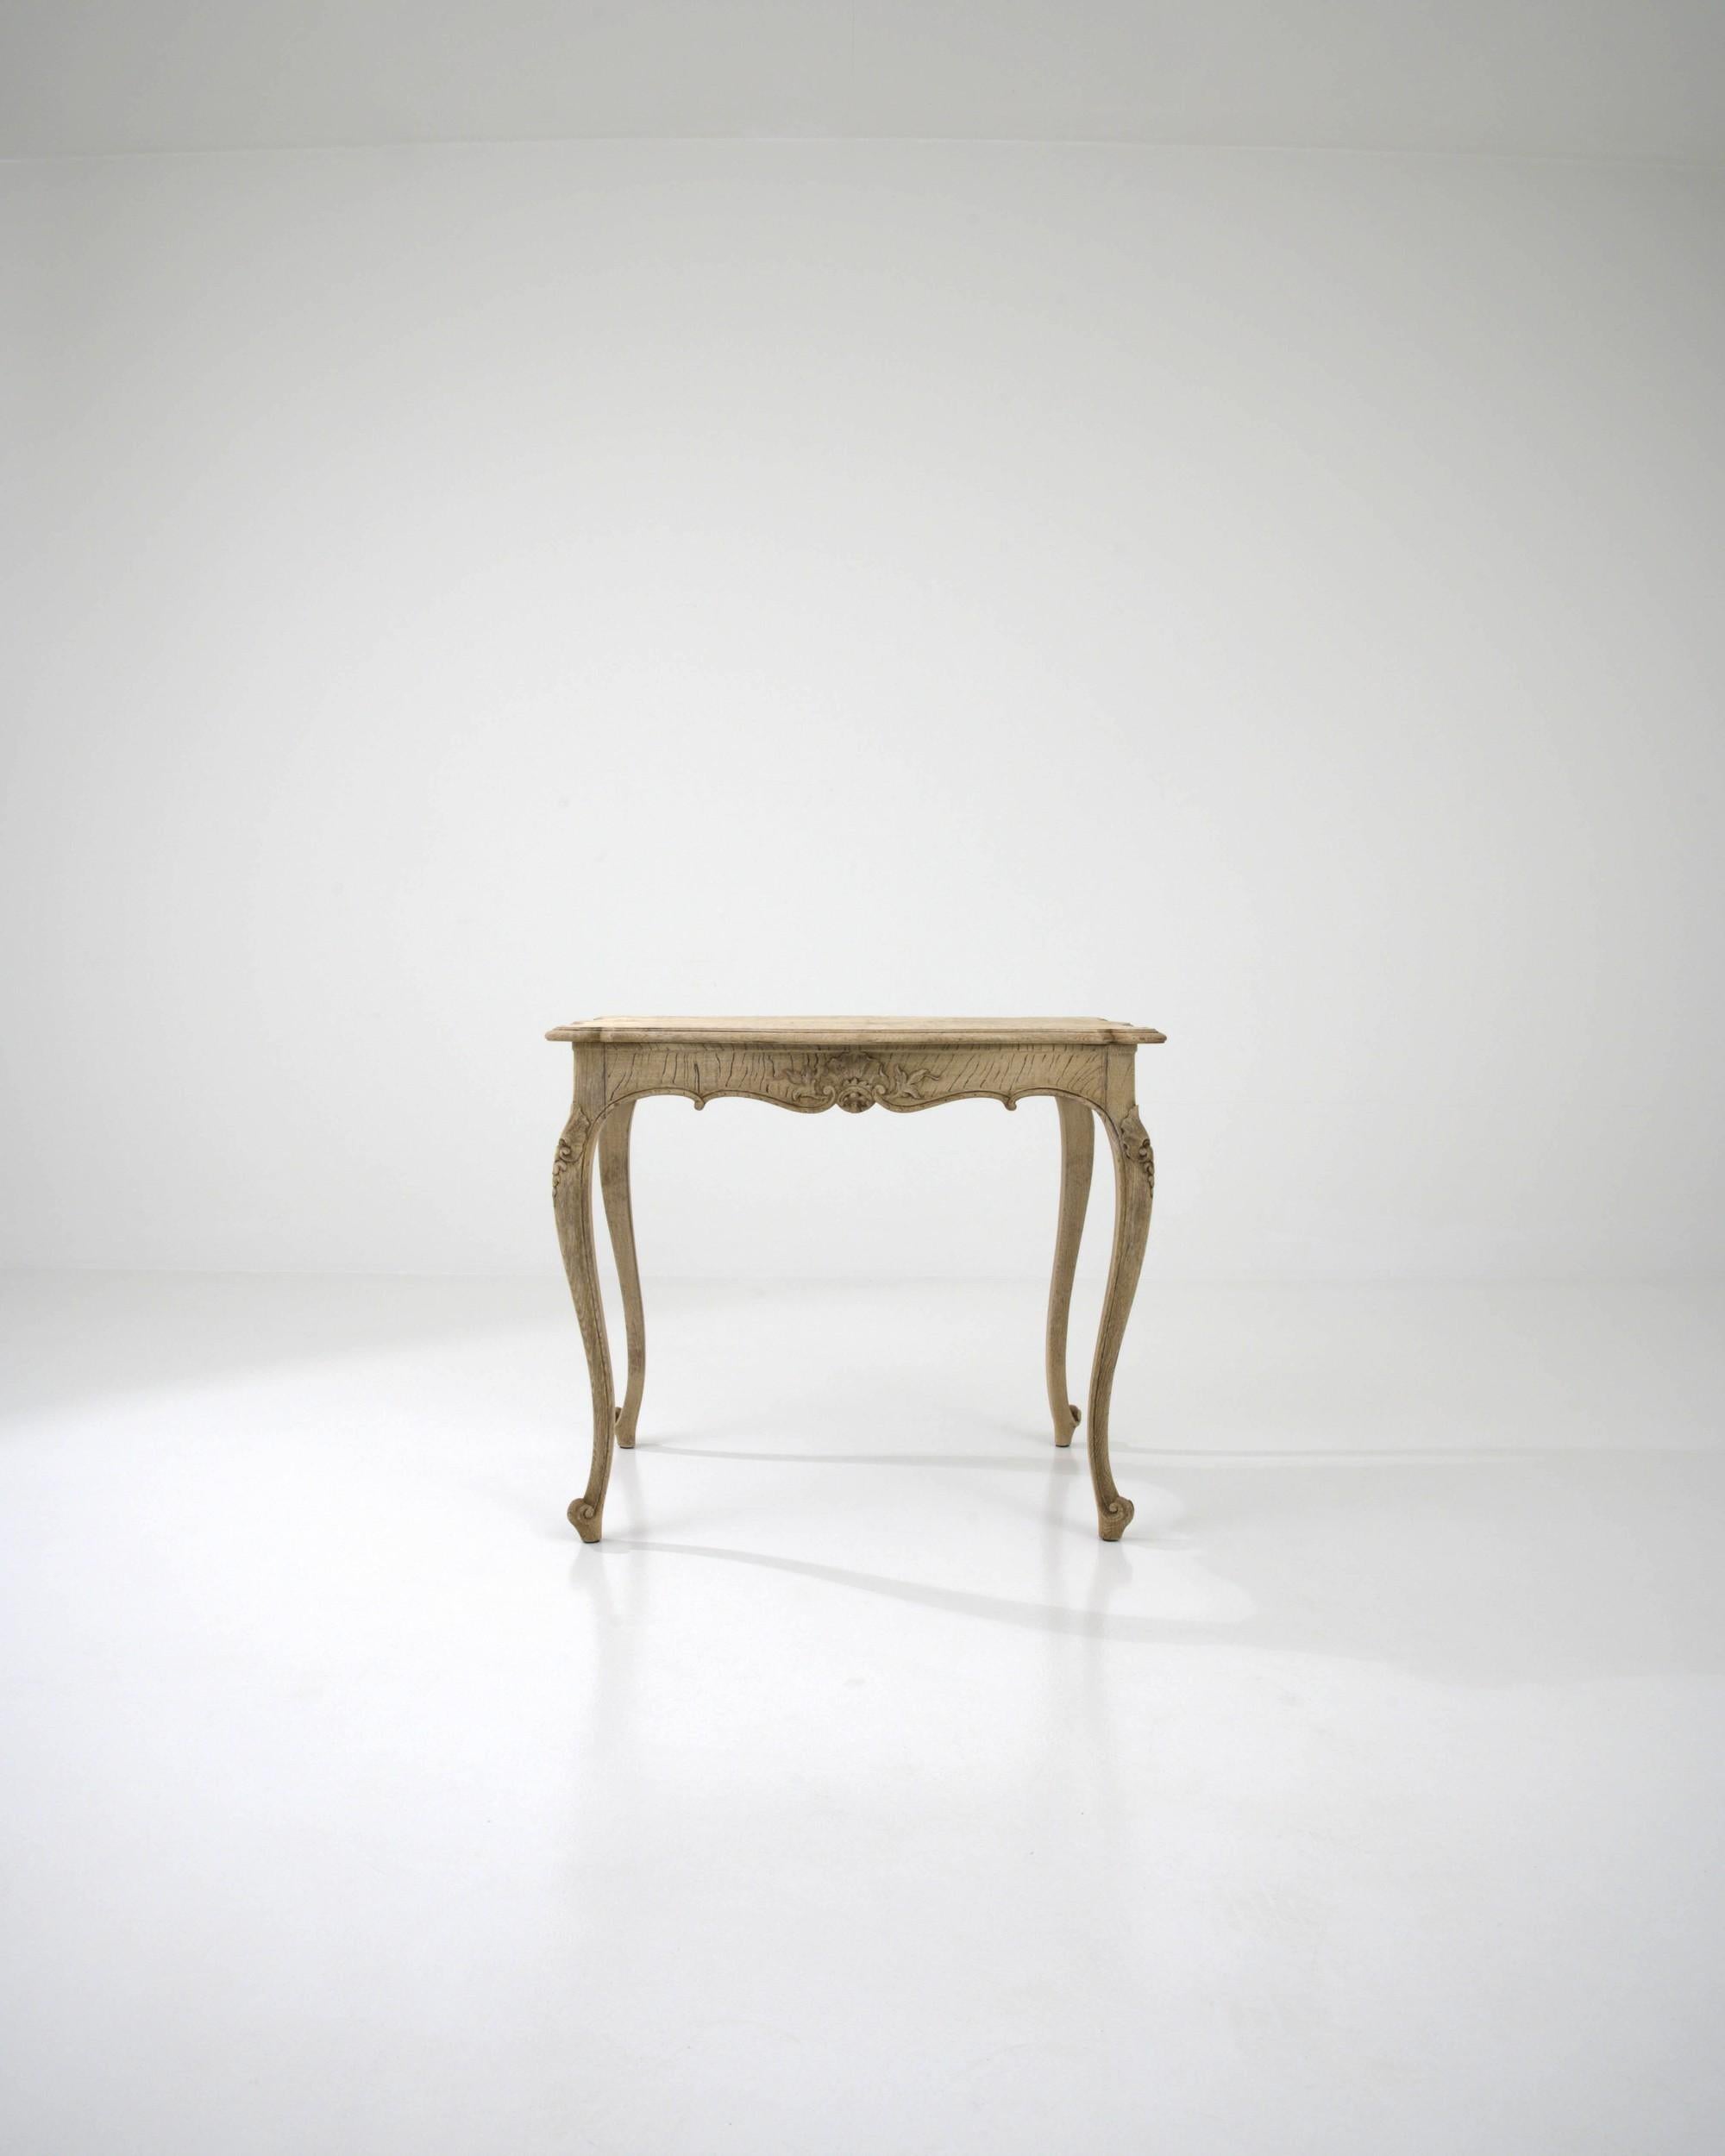 An oak side table originating in 19th Century France. This table was designed in the fashion of its time. A shell ornament indicates Rococo, the shape of the legs – a subtle cabriole – skews Baroque, the scalloped outline classical. This eclectic